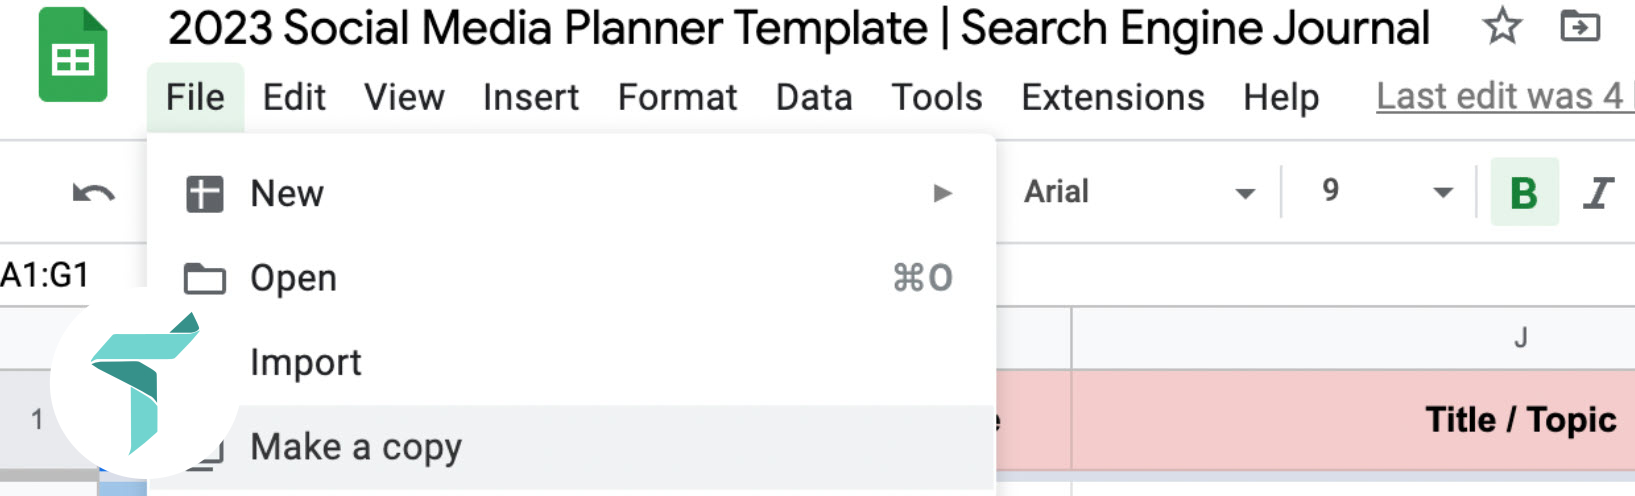 Social Media Planner: How To Plan Your Quarter (With Template)